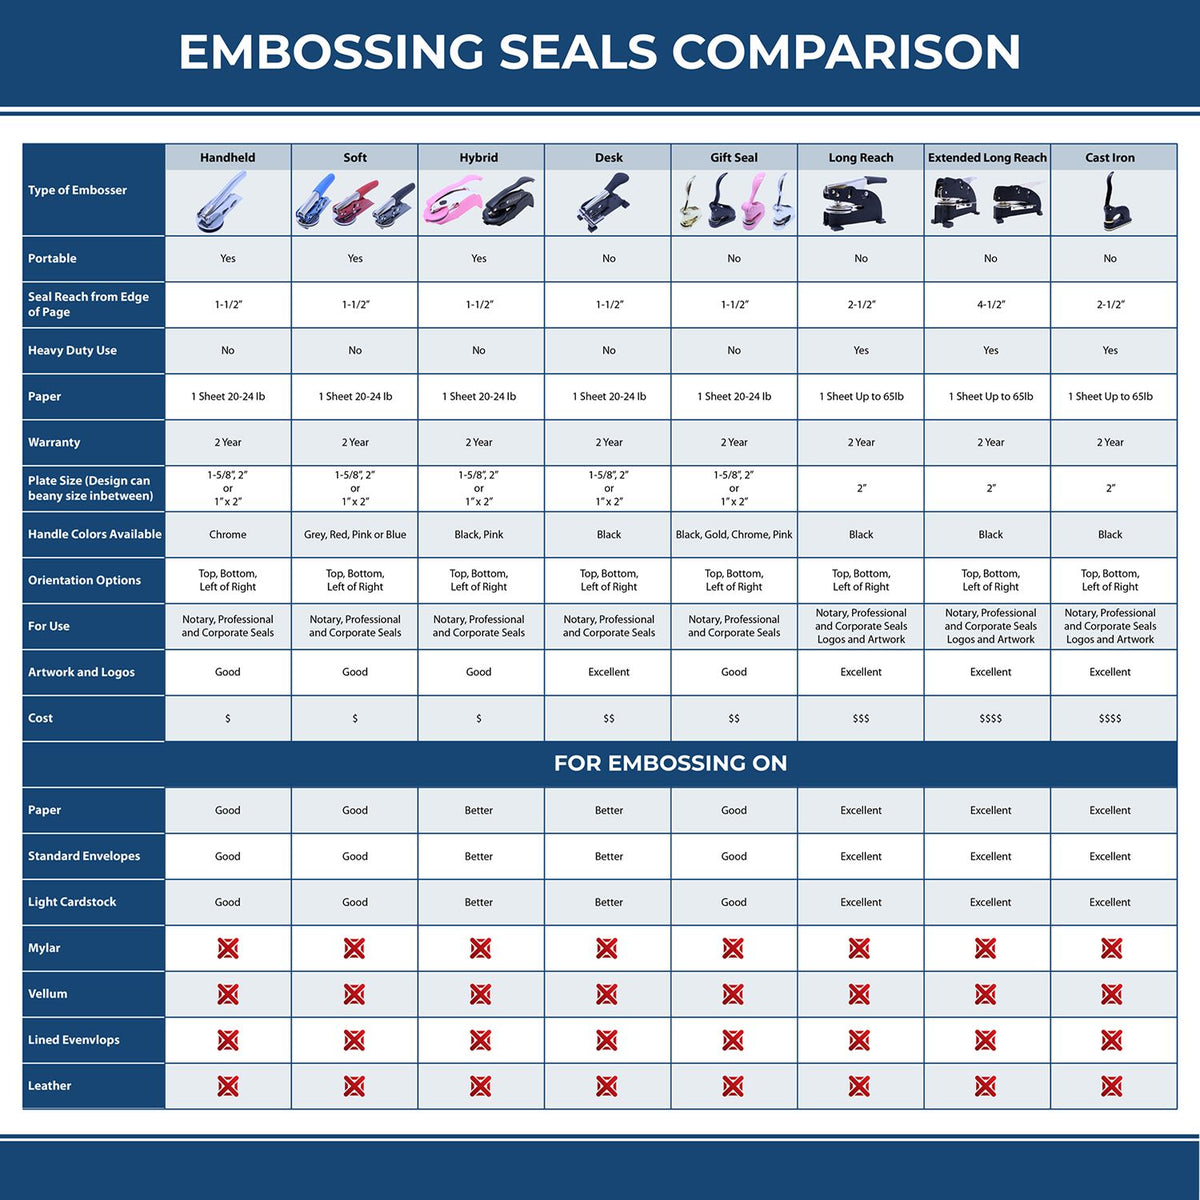 A comparison chart for the different types of mount models available for the Hybrid Maine Geologist Seal